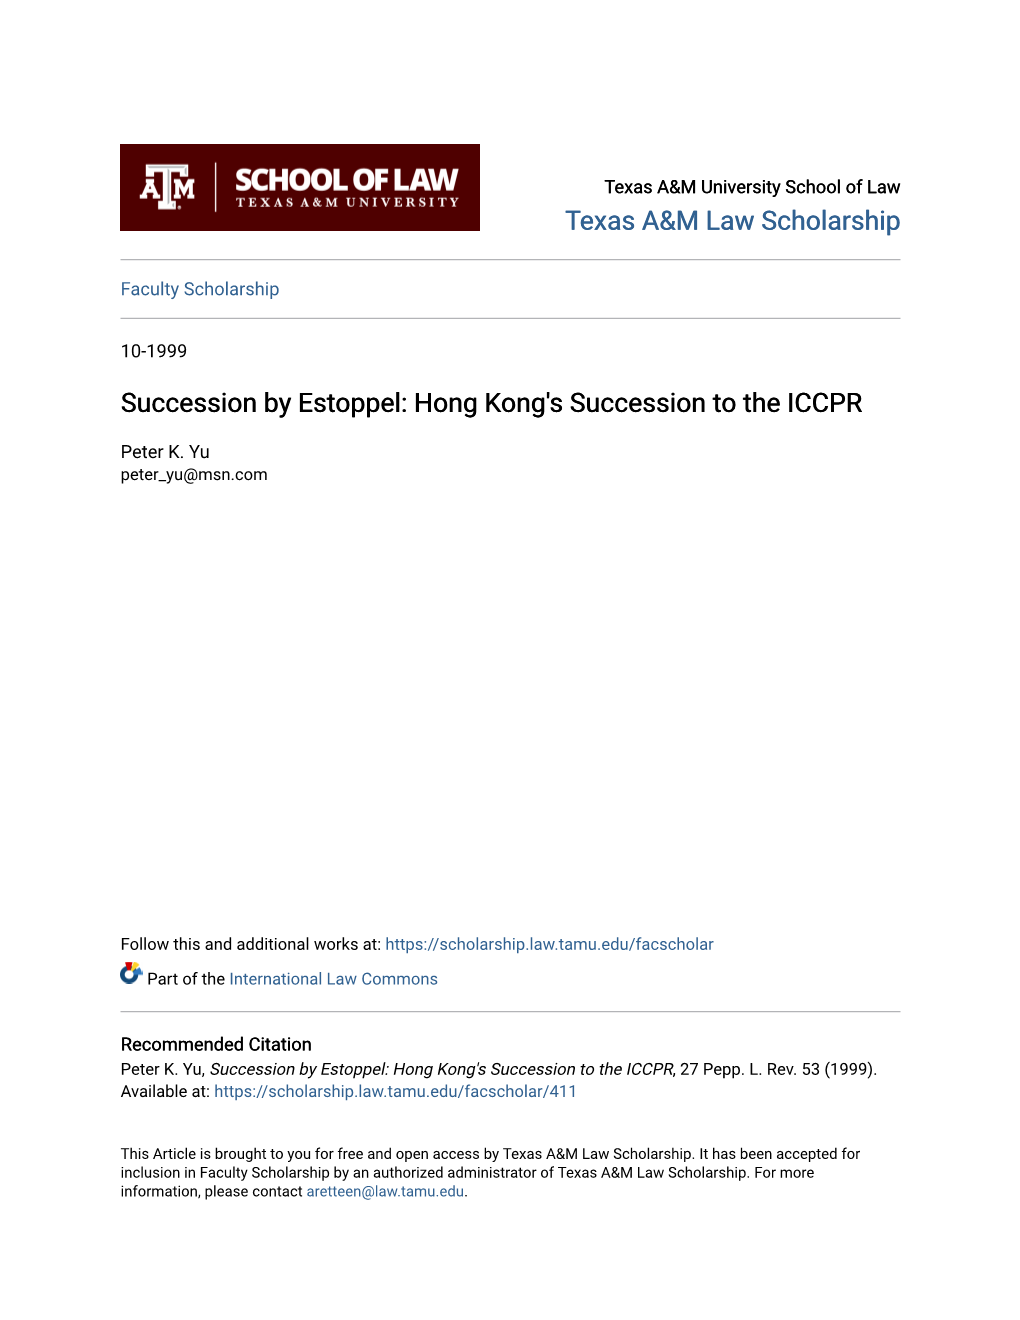 Succession by Estoppel: Hong Kong's Succession to the ICCPR